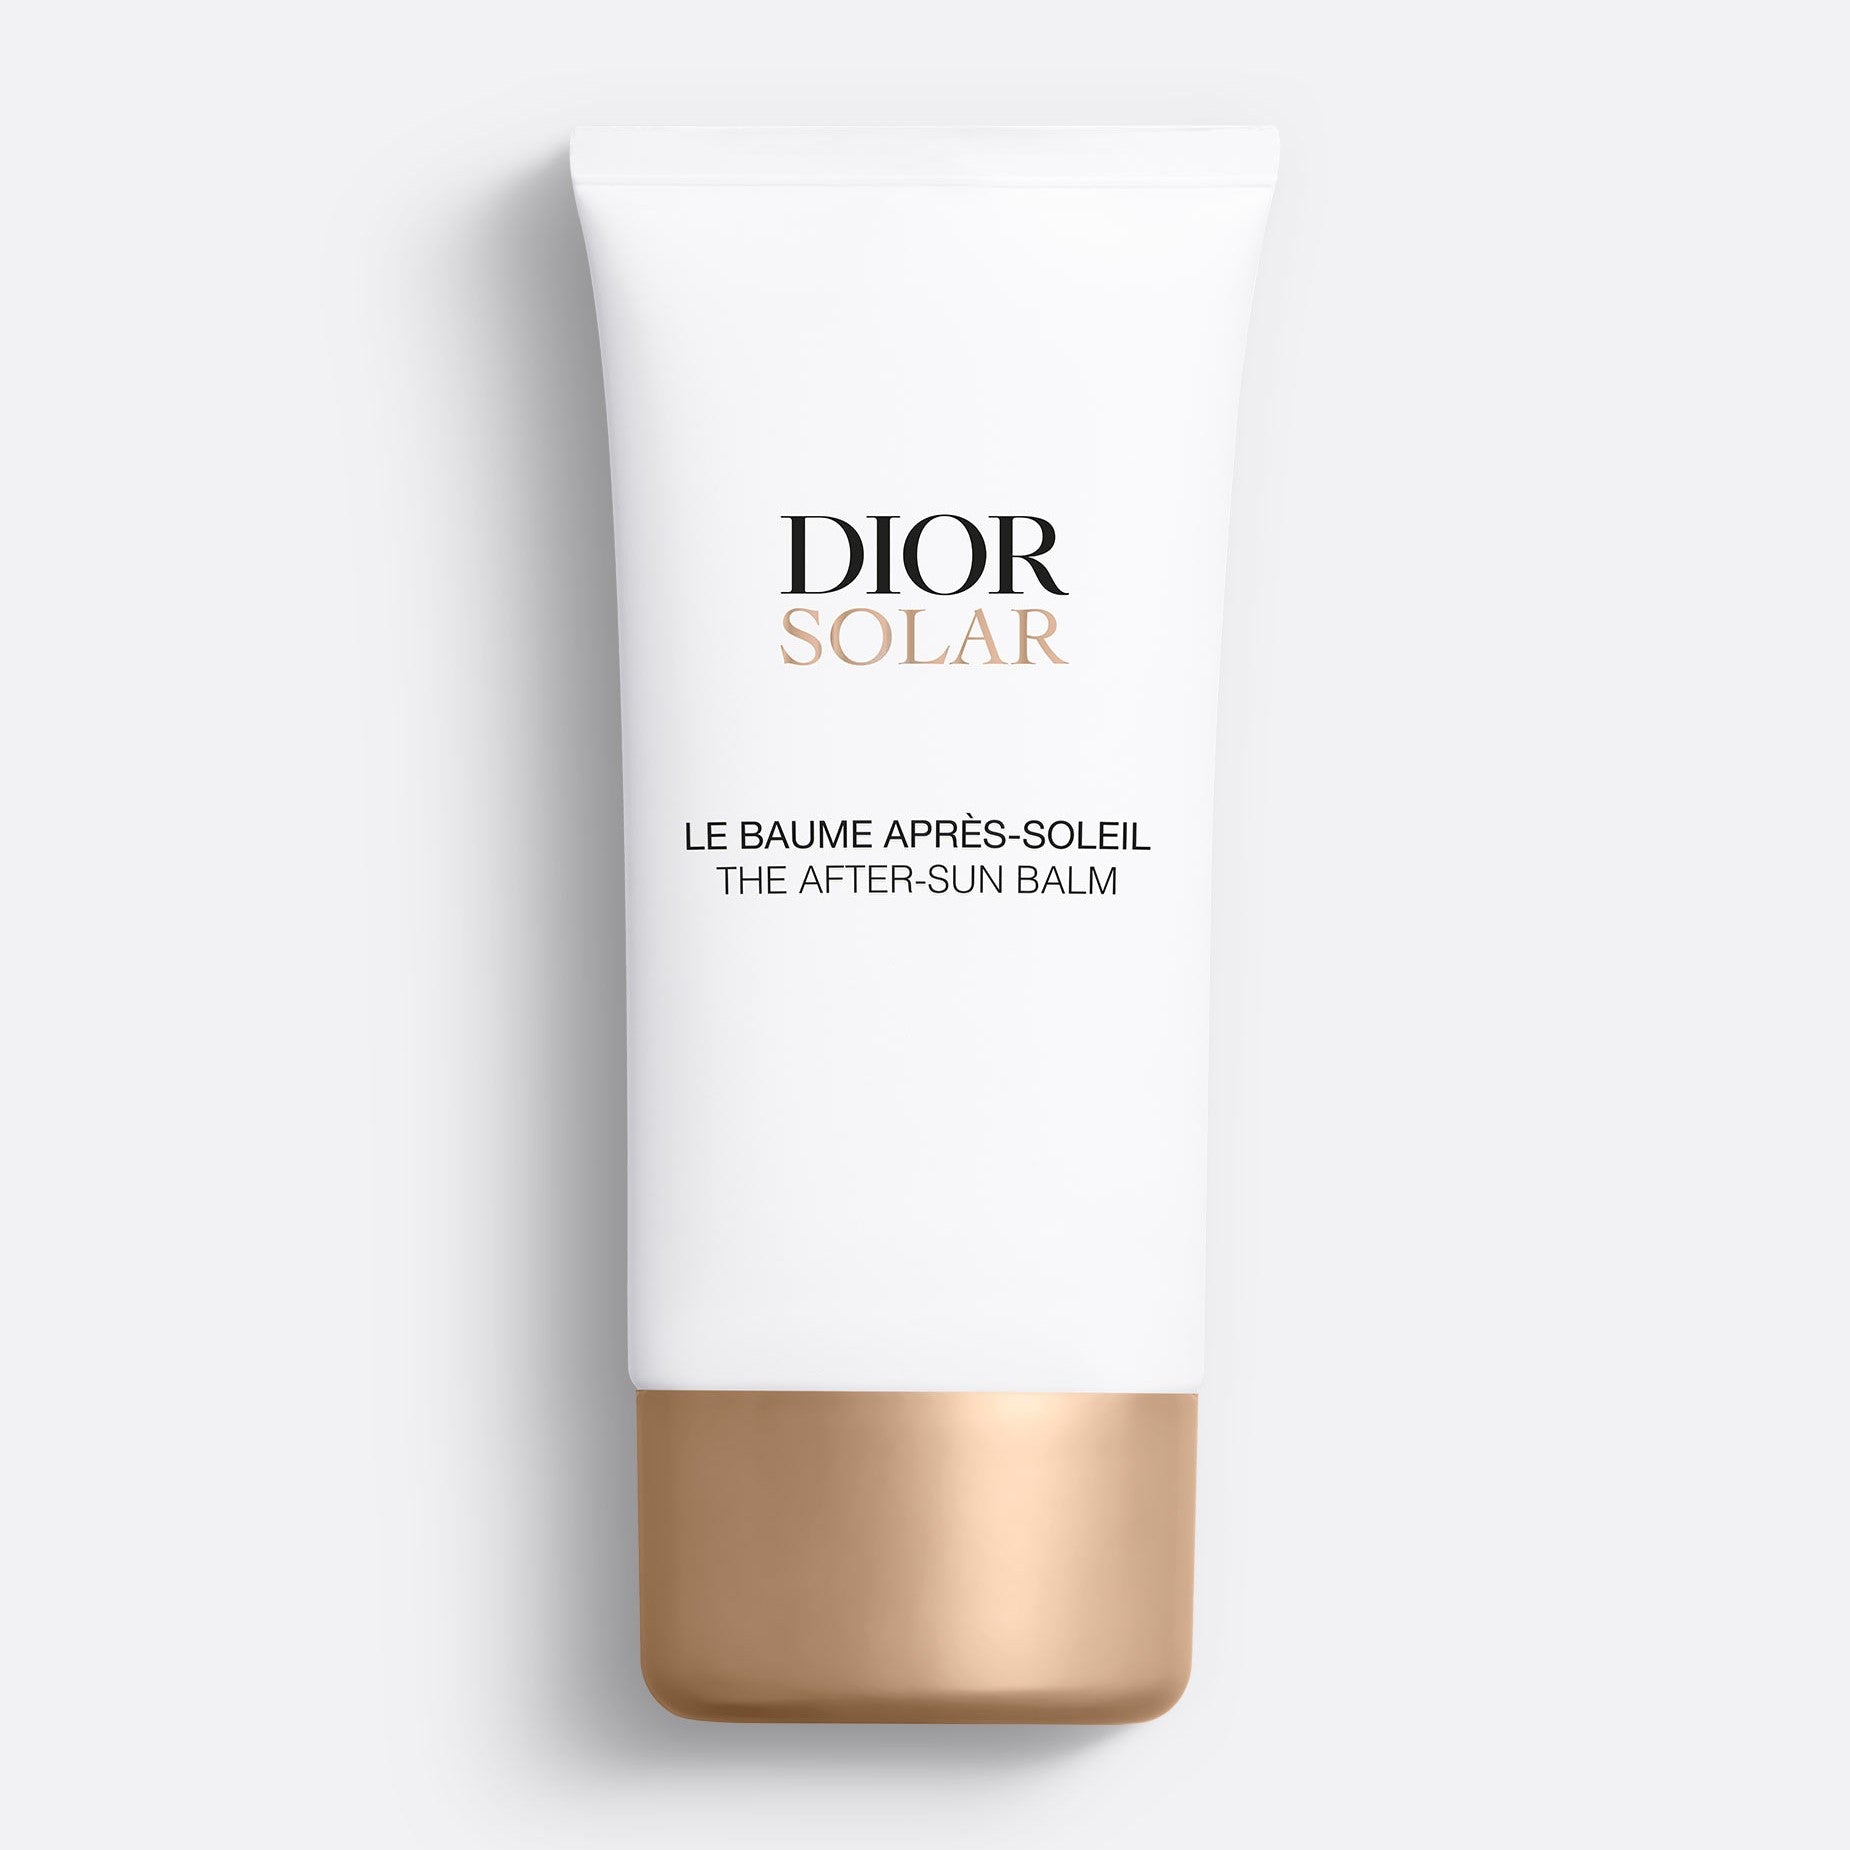 DIOR SOLAR THE AFTER-SUN BALM | Hydrating and Refreshing Balm